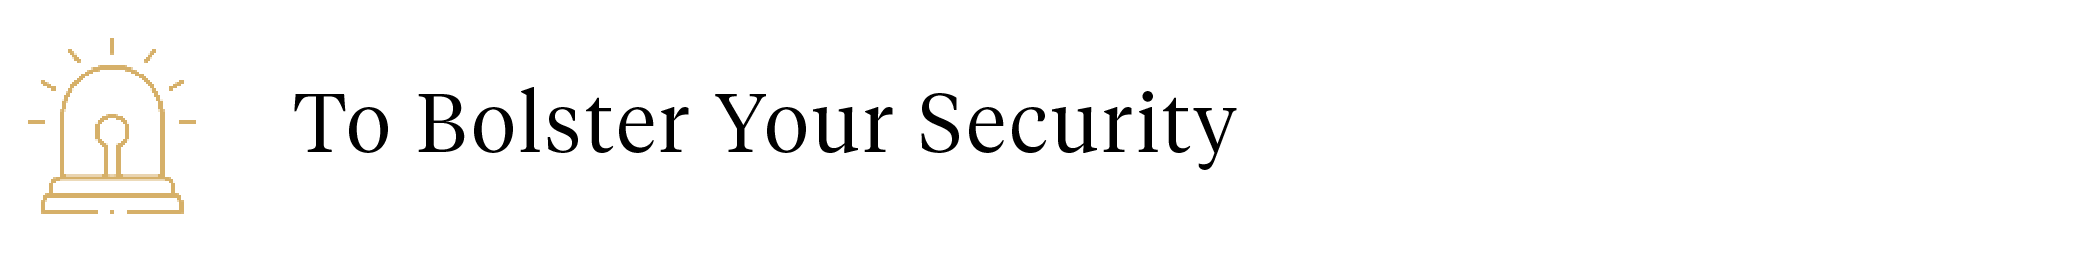 To Bolster Your Security